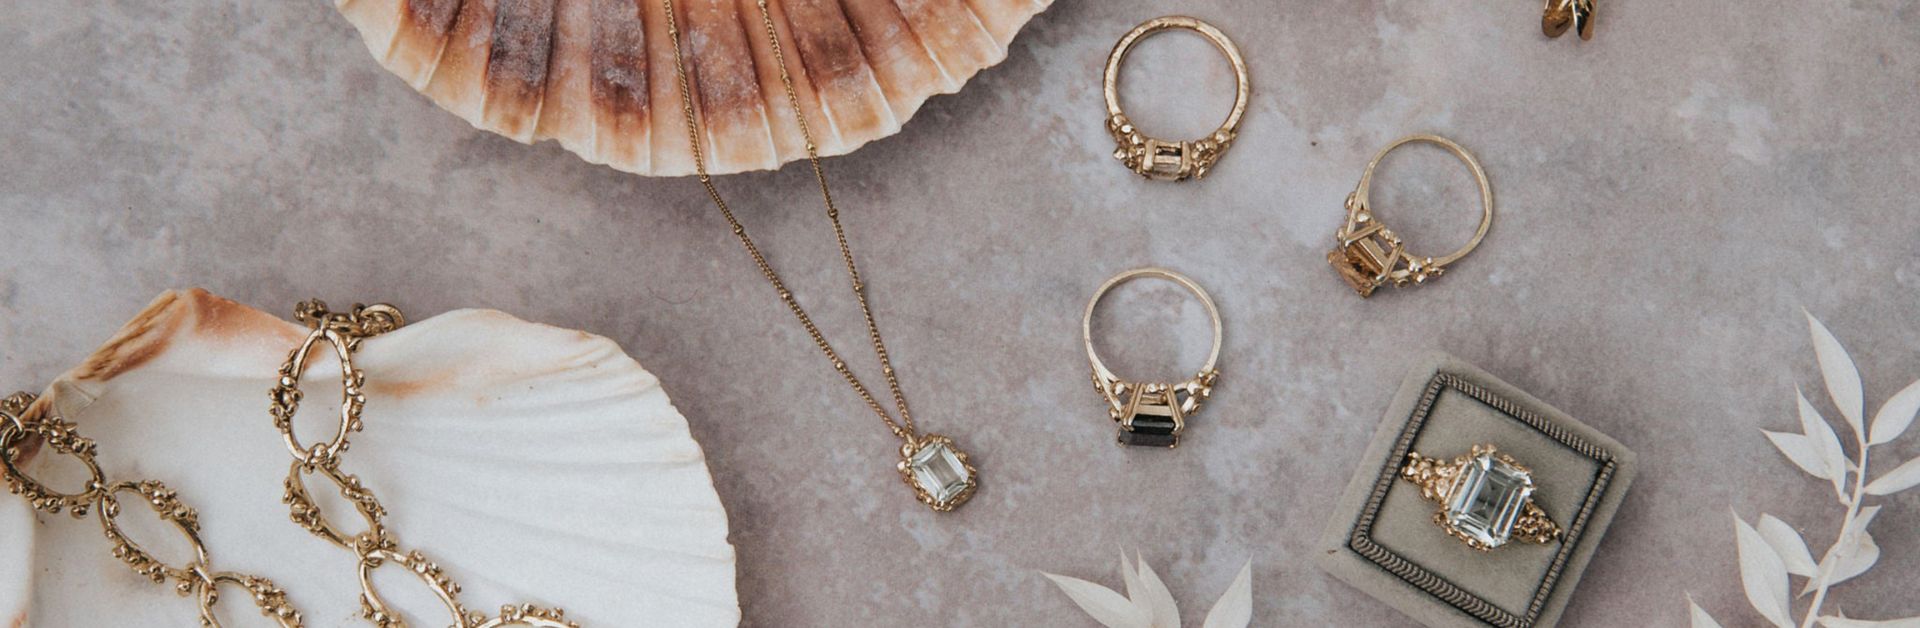 Simple yet effective Jewelry Gift Ideas for Her